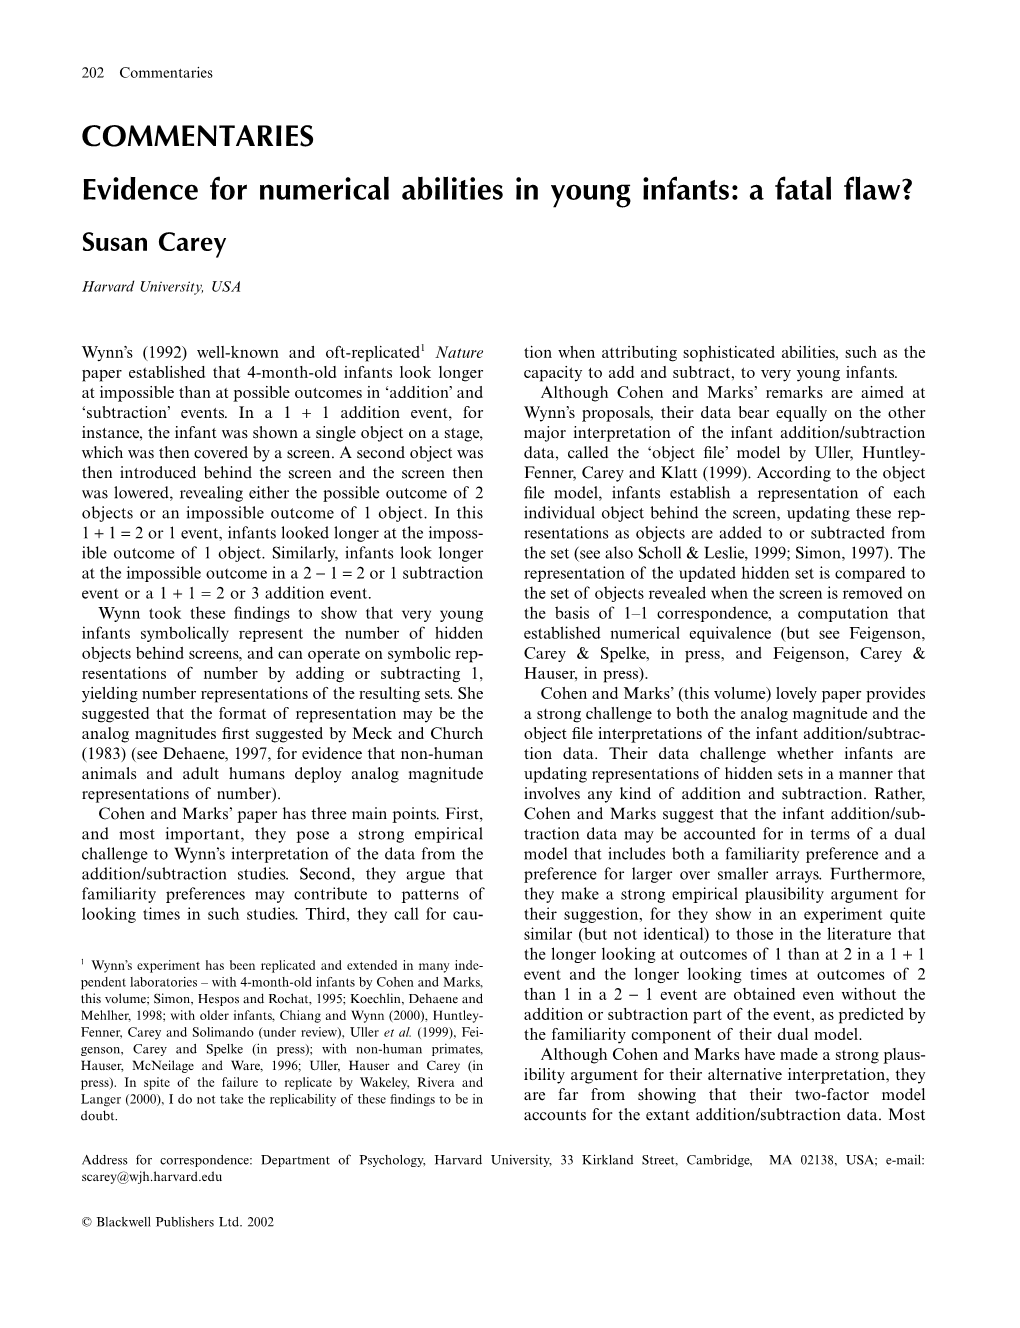 COMMENTARIES Evidence for Numerical Abilities in Young Infants